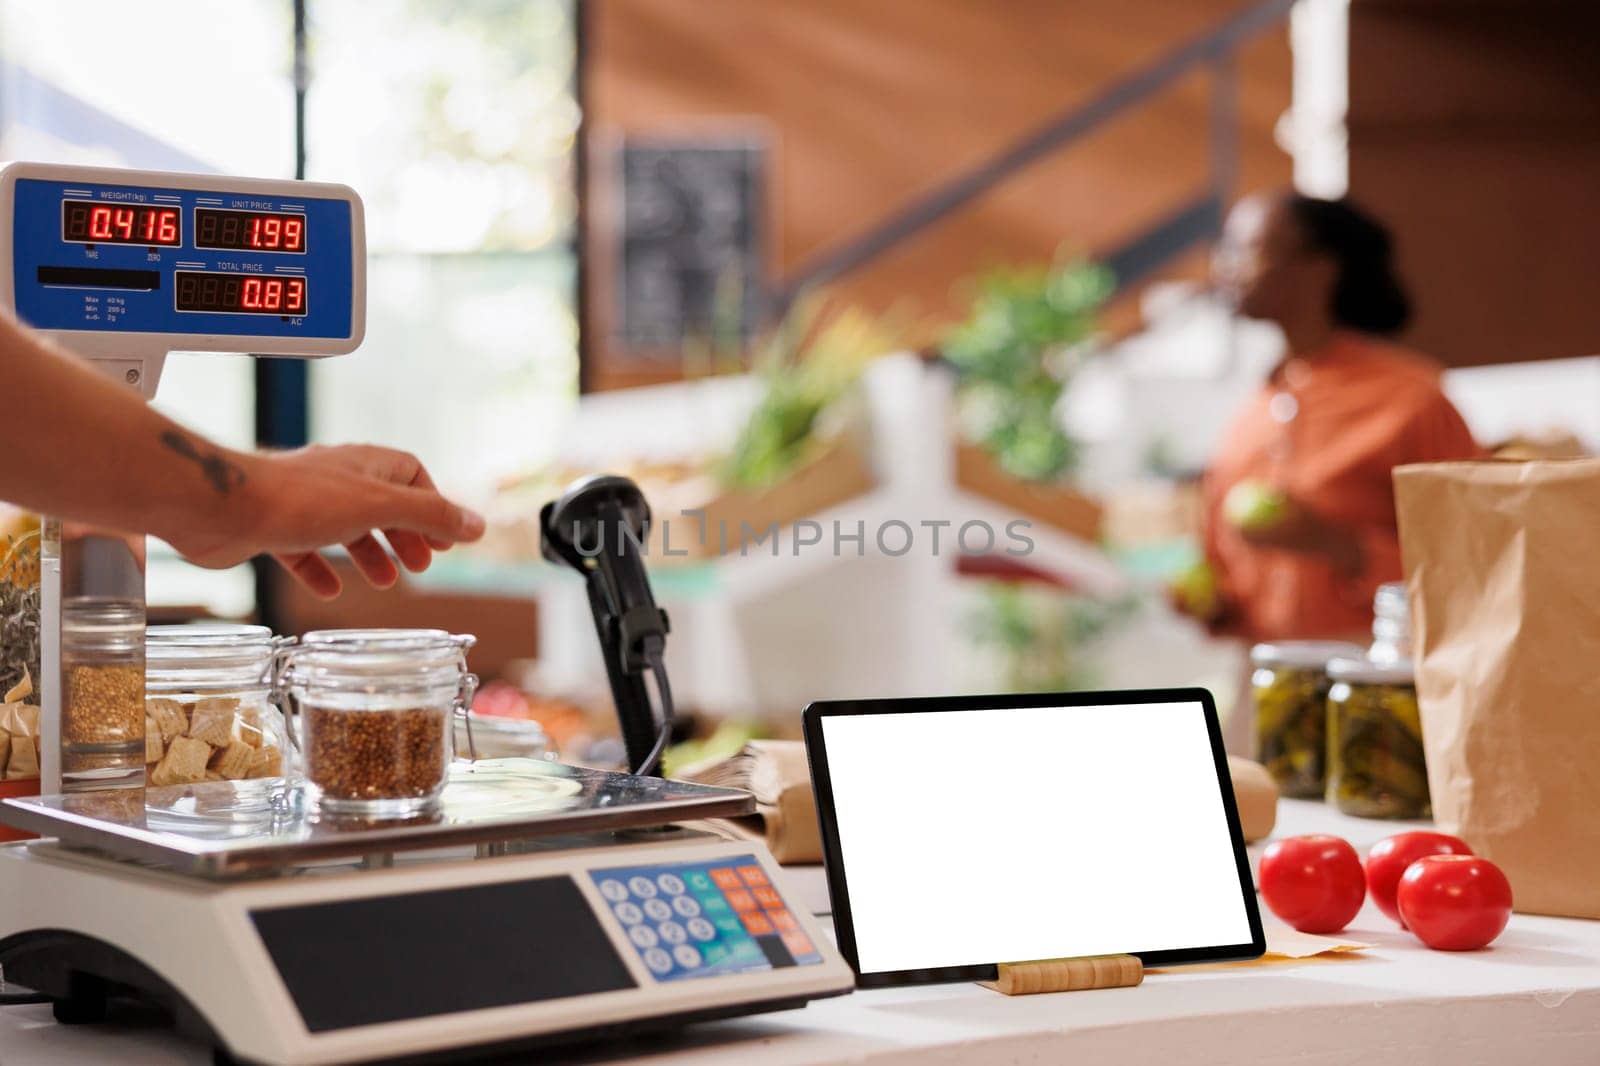 Glass jar filled with bio food items is placed on a measuring weight scale on the counter of grocery store. Image shows a tablet displaying blank chromakey mockup template while seller weighs an item.